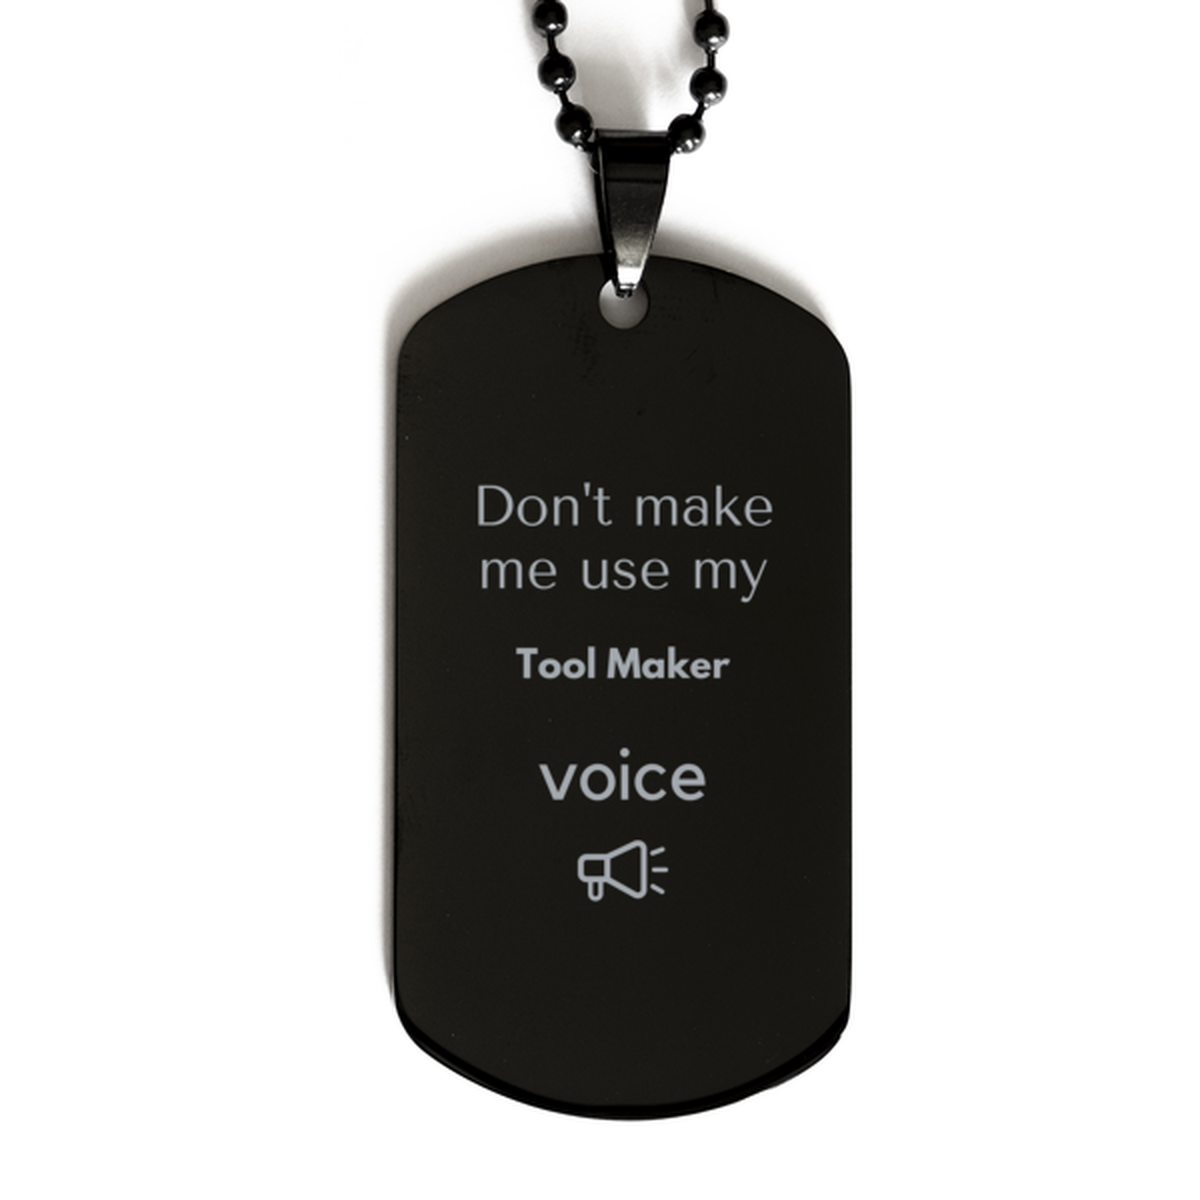 Don't make me use my Tool Maker voice, Sarcasm Tool Maker Gifts, Christmas Tool Maker Black Dog Tag Birthday Unique Gifts For Tool Maker Coworkers, Men, Women, Colleague, Friends